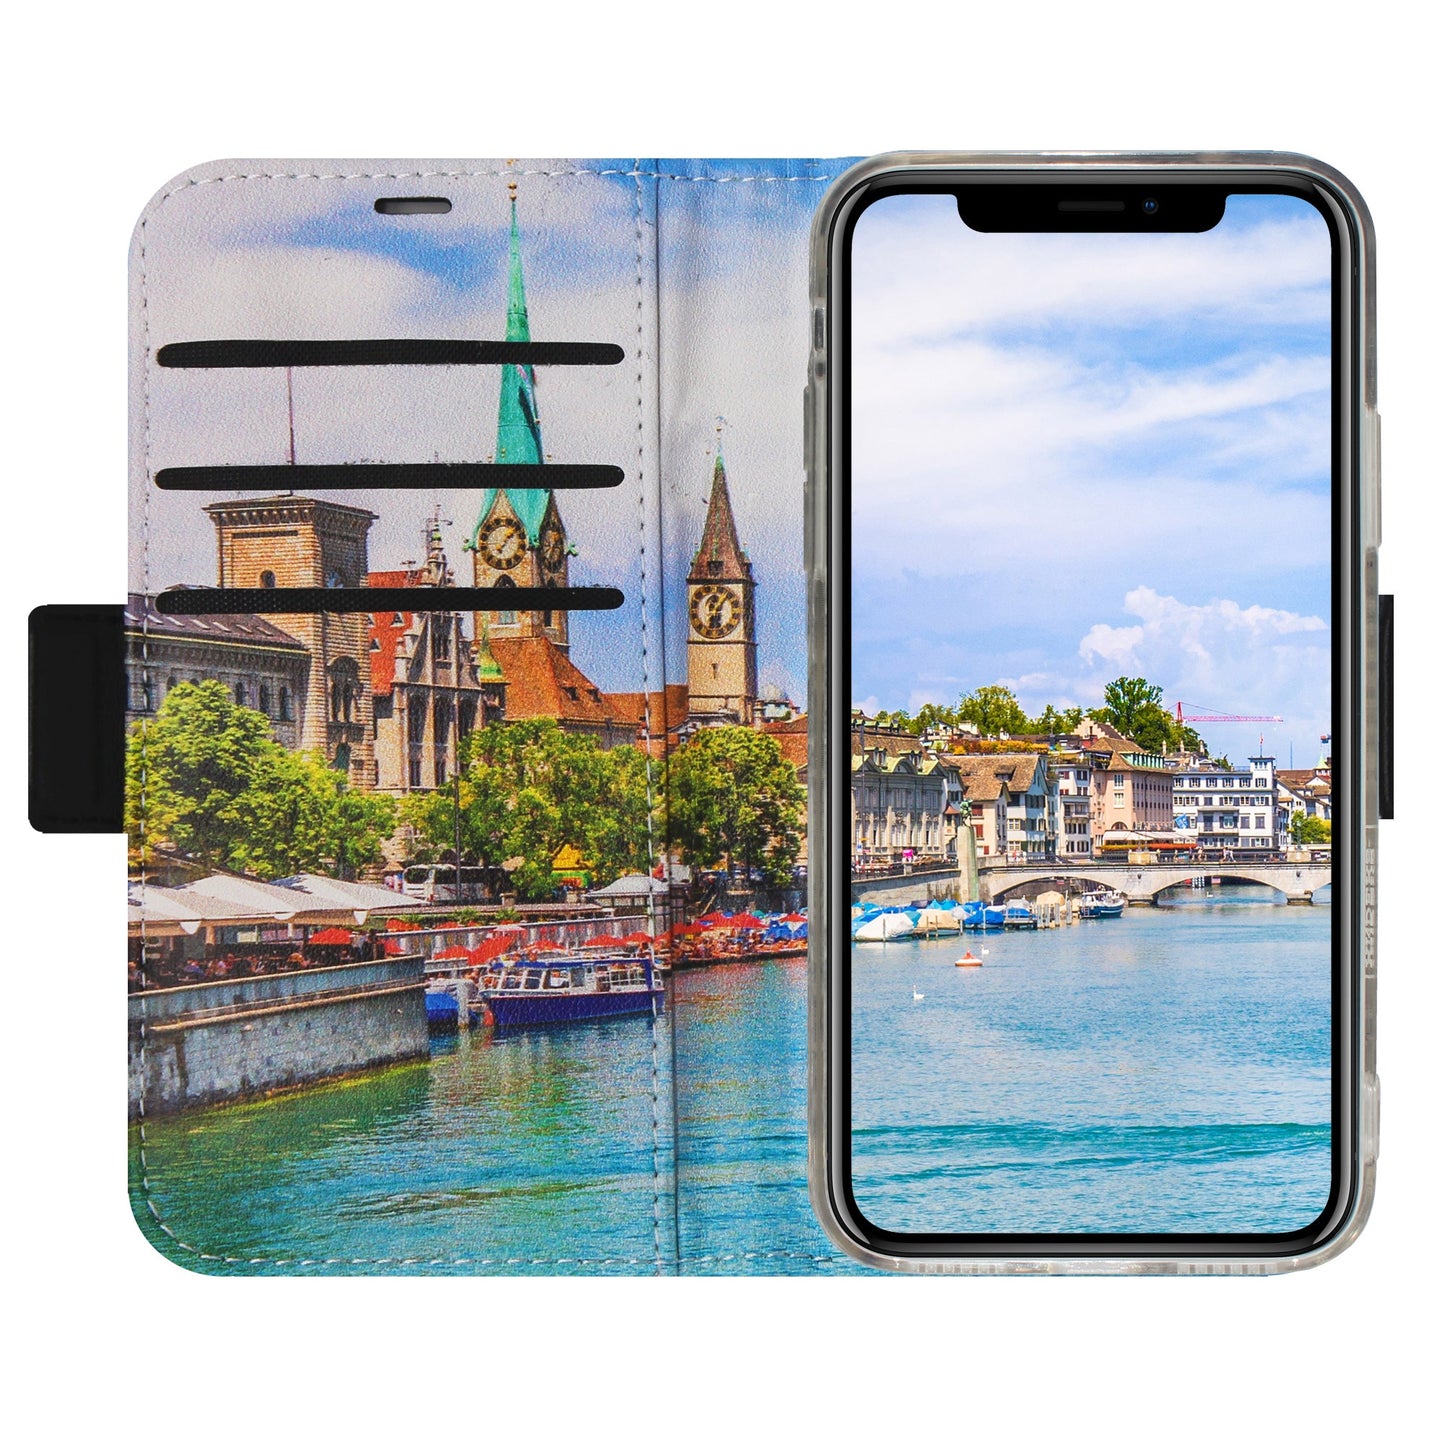 Zurich City Limmat Victor Case for iPhone 11 Pro Max